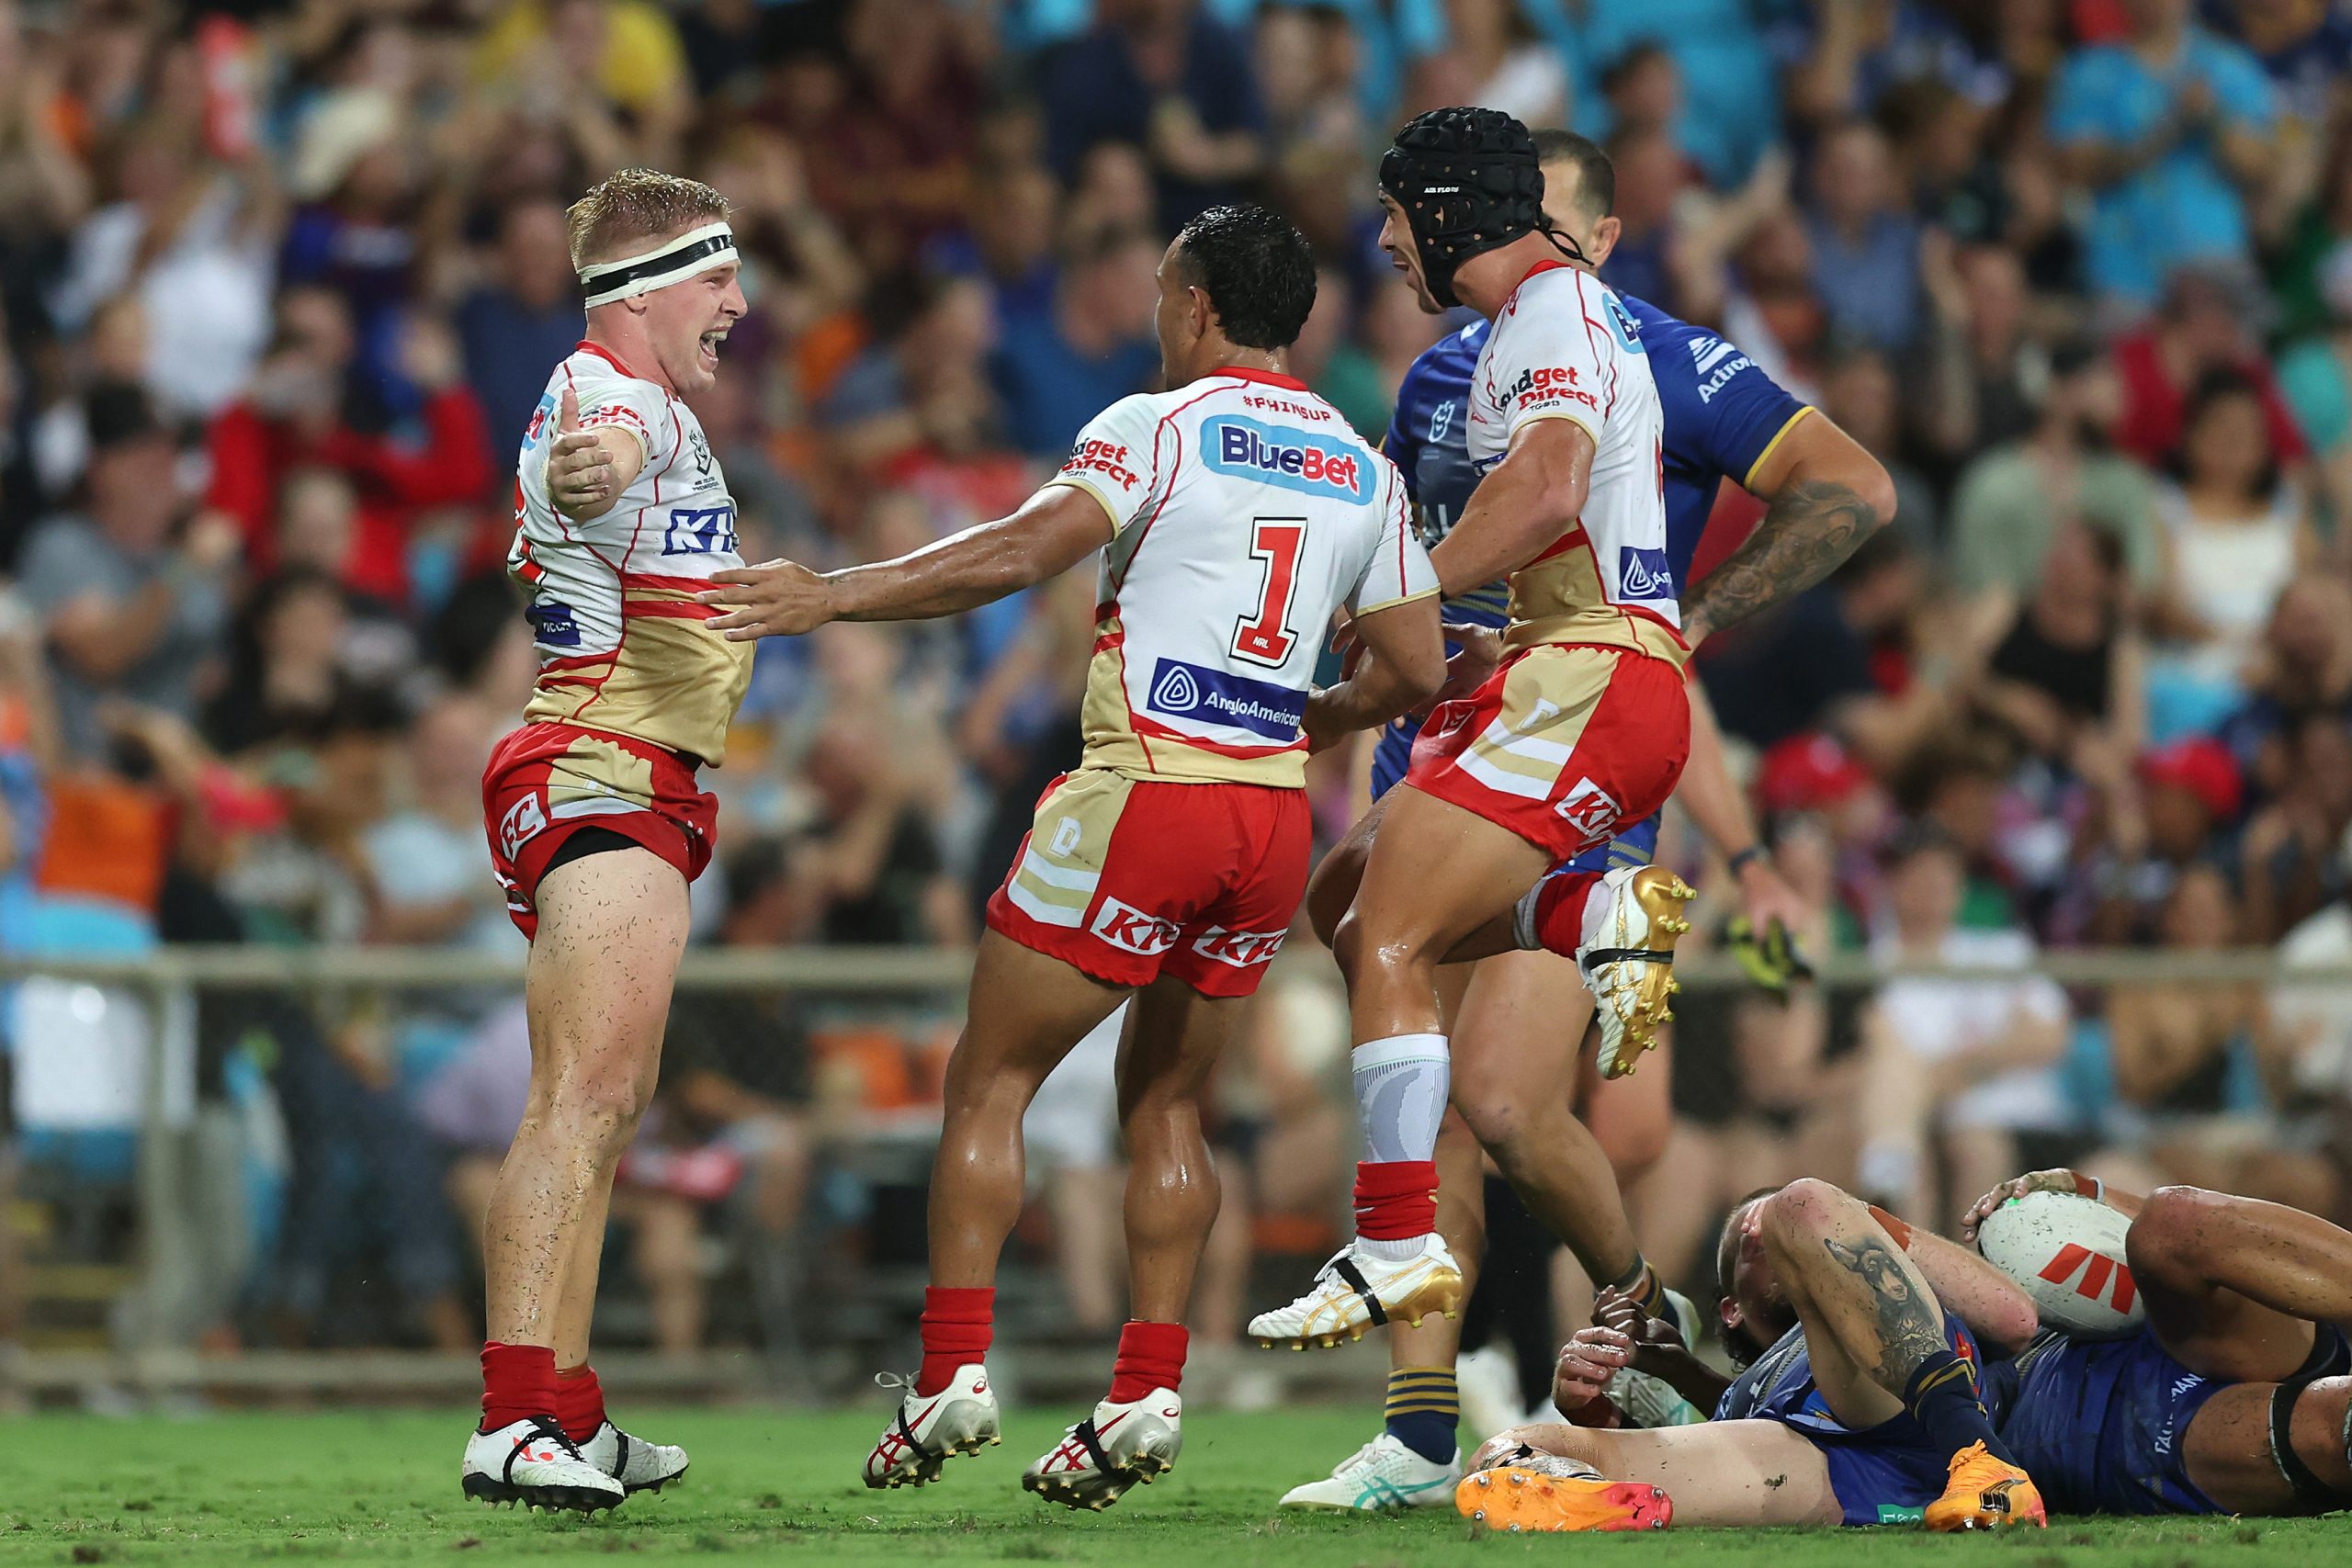 Max Plath celebrates with teammates after scoring a try during the round seven NRL match between the Parramatta Eels and the Dolphins.